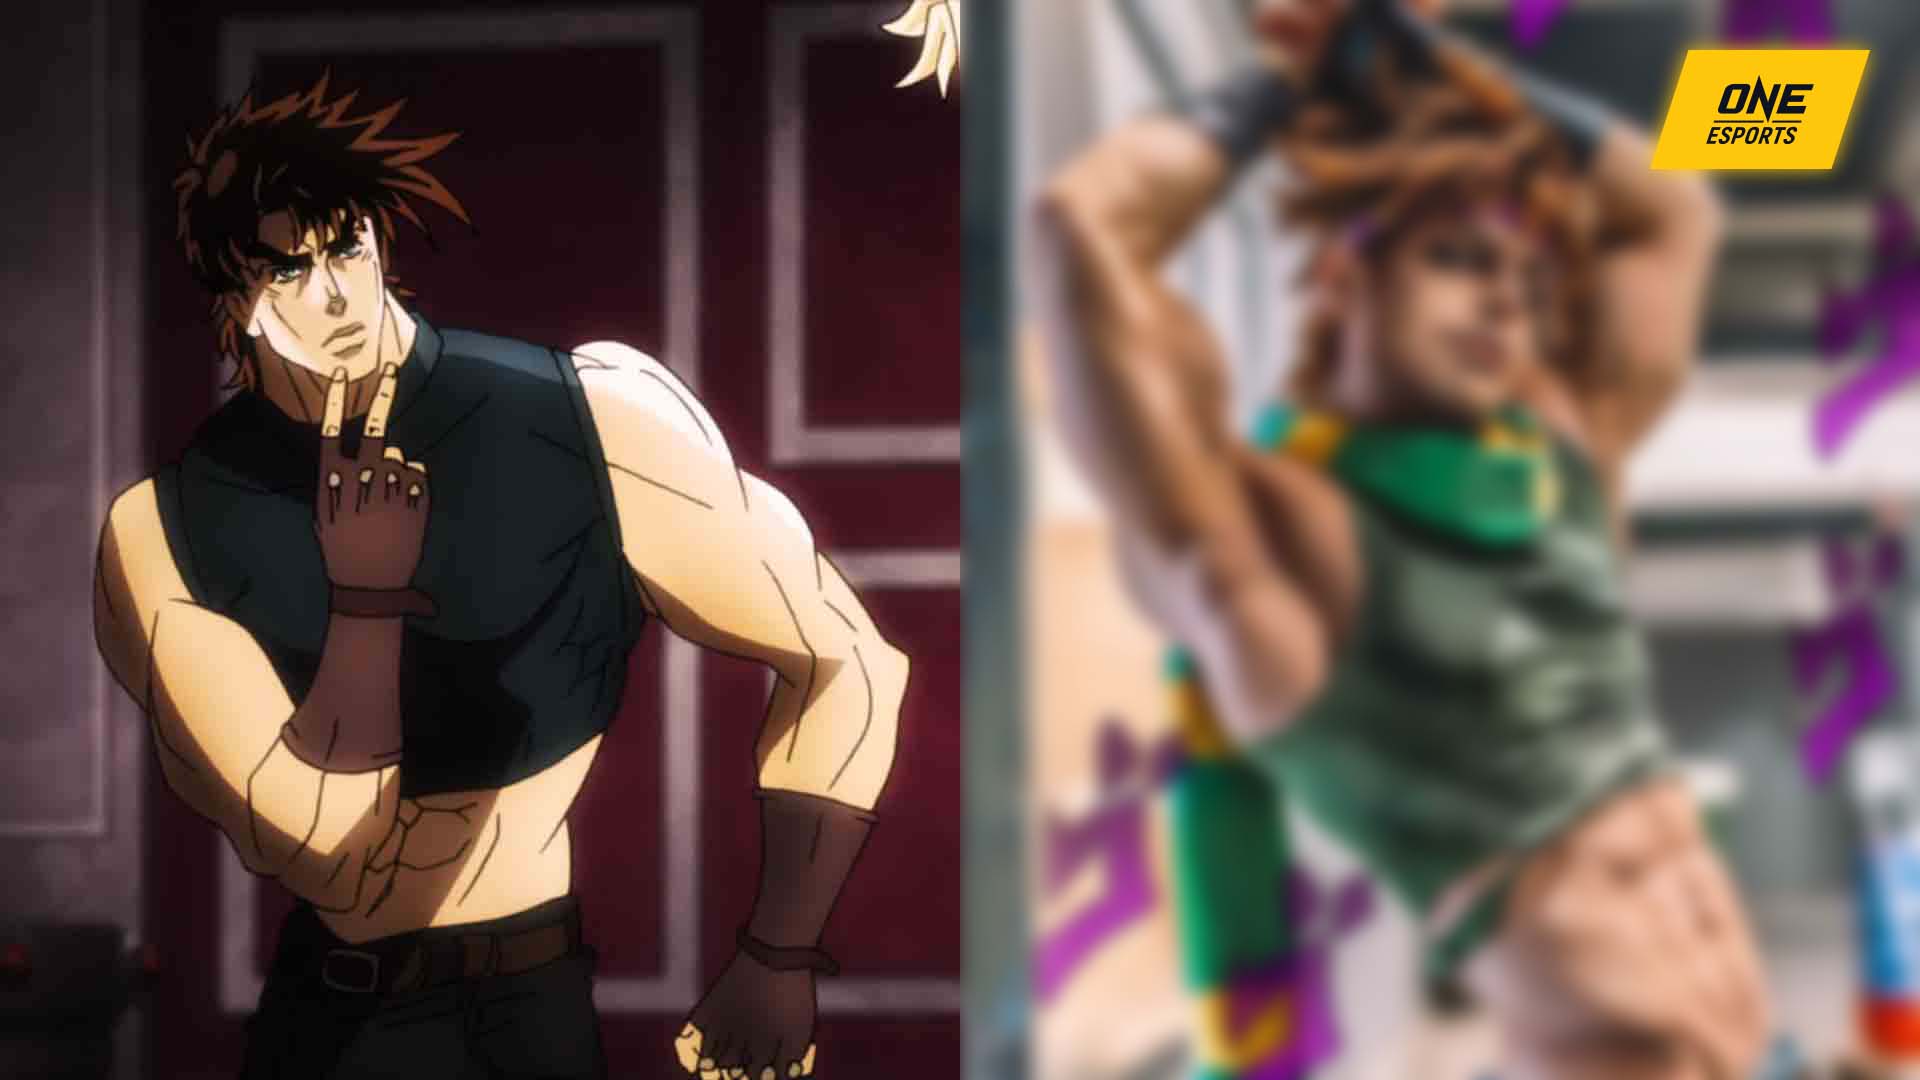 JoJo cosplay brings anime jawlines and six-packs to life